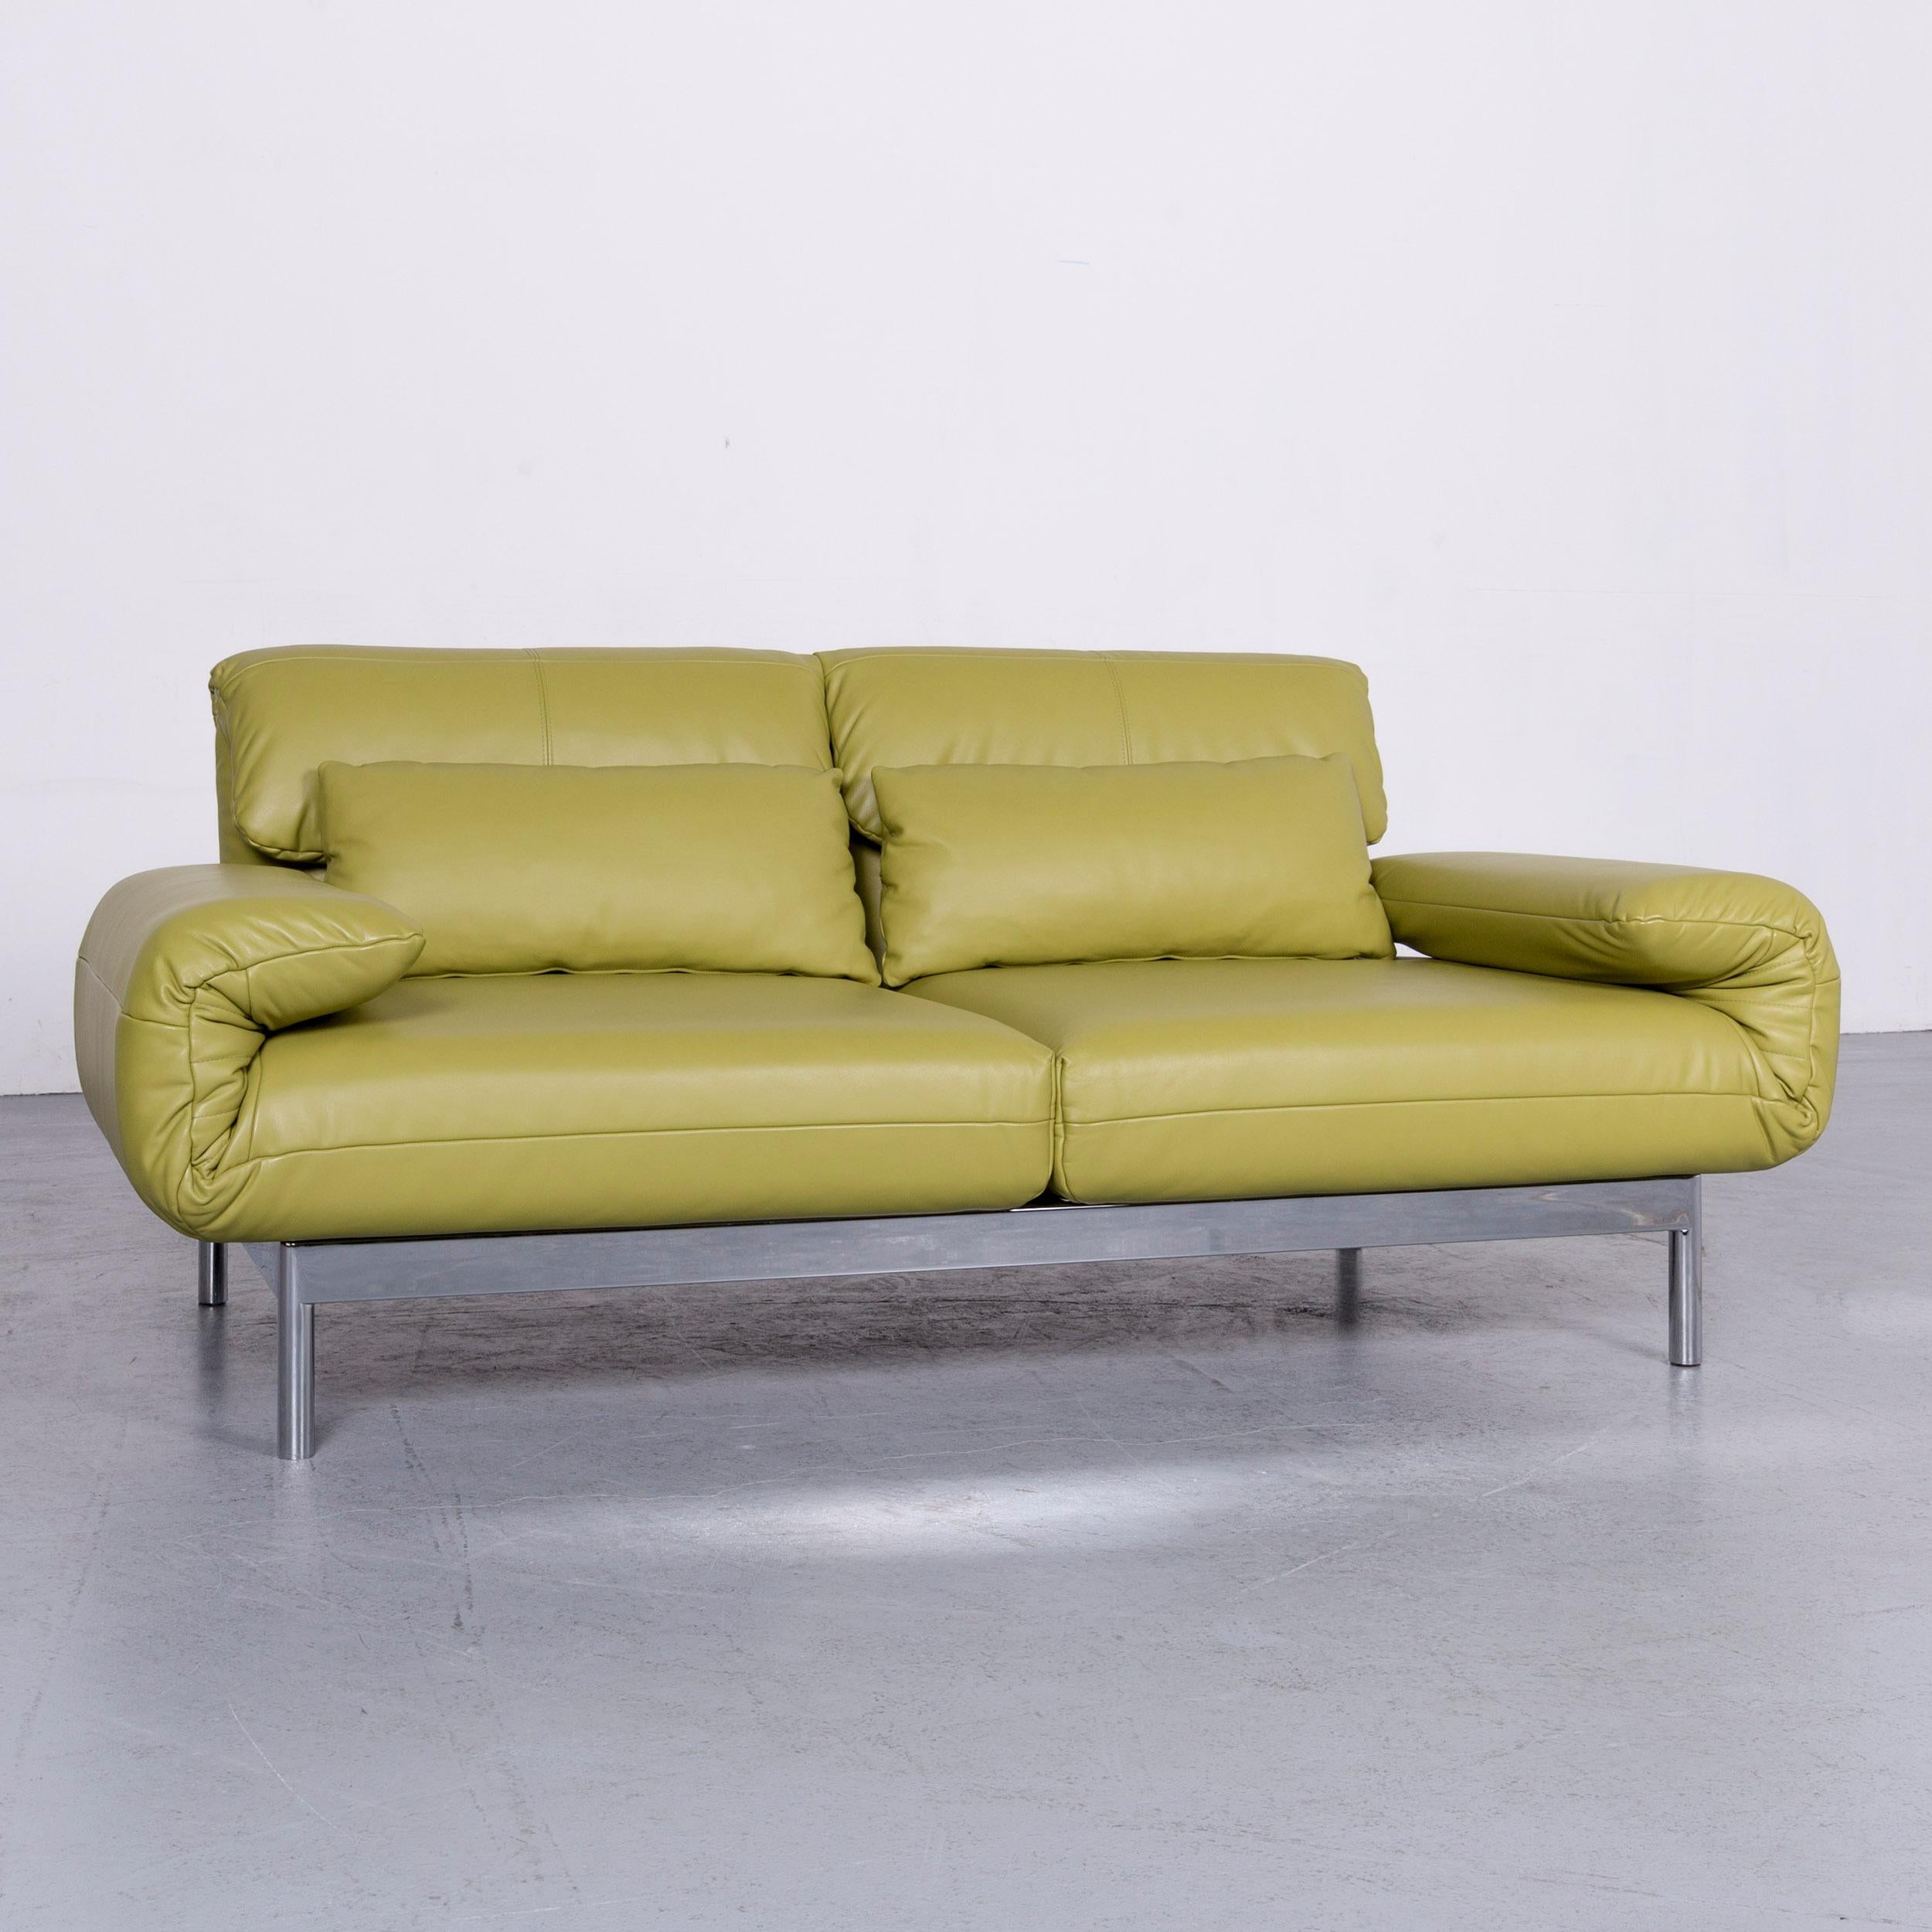 German Rolf Benz Plura Designer Sofa Leather Green Relax Function Couch Modern